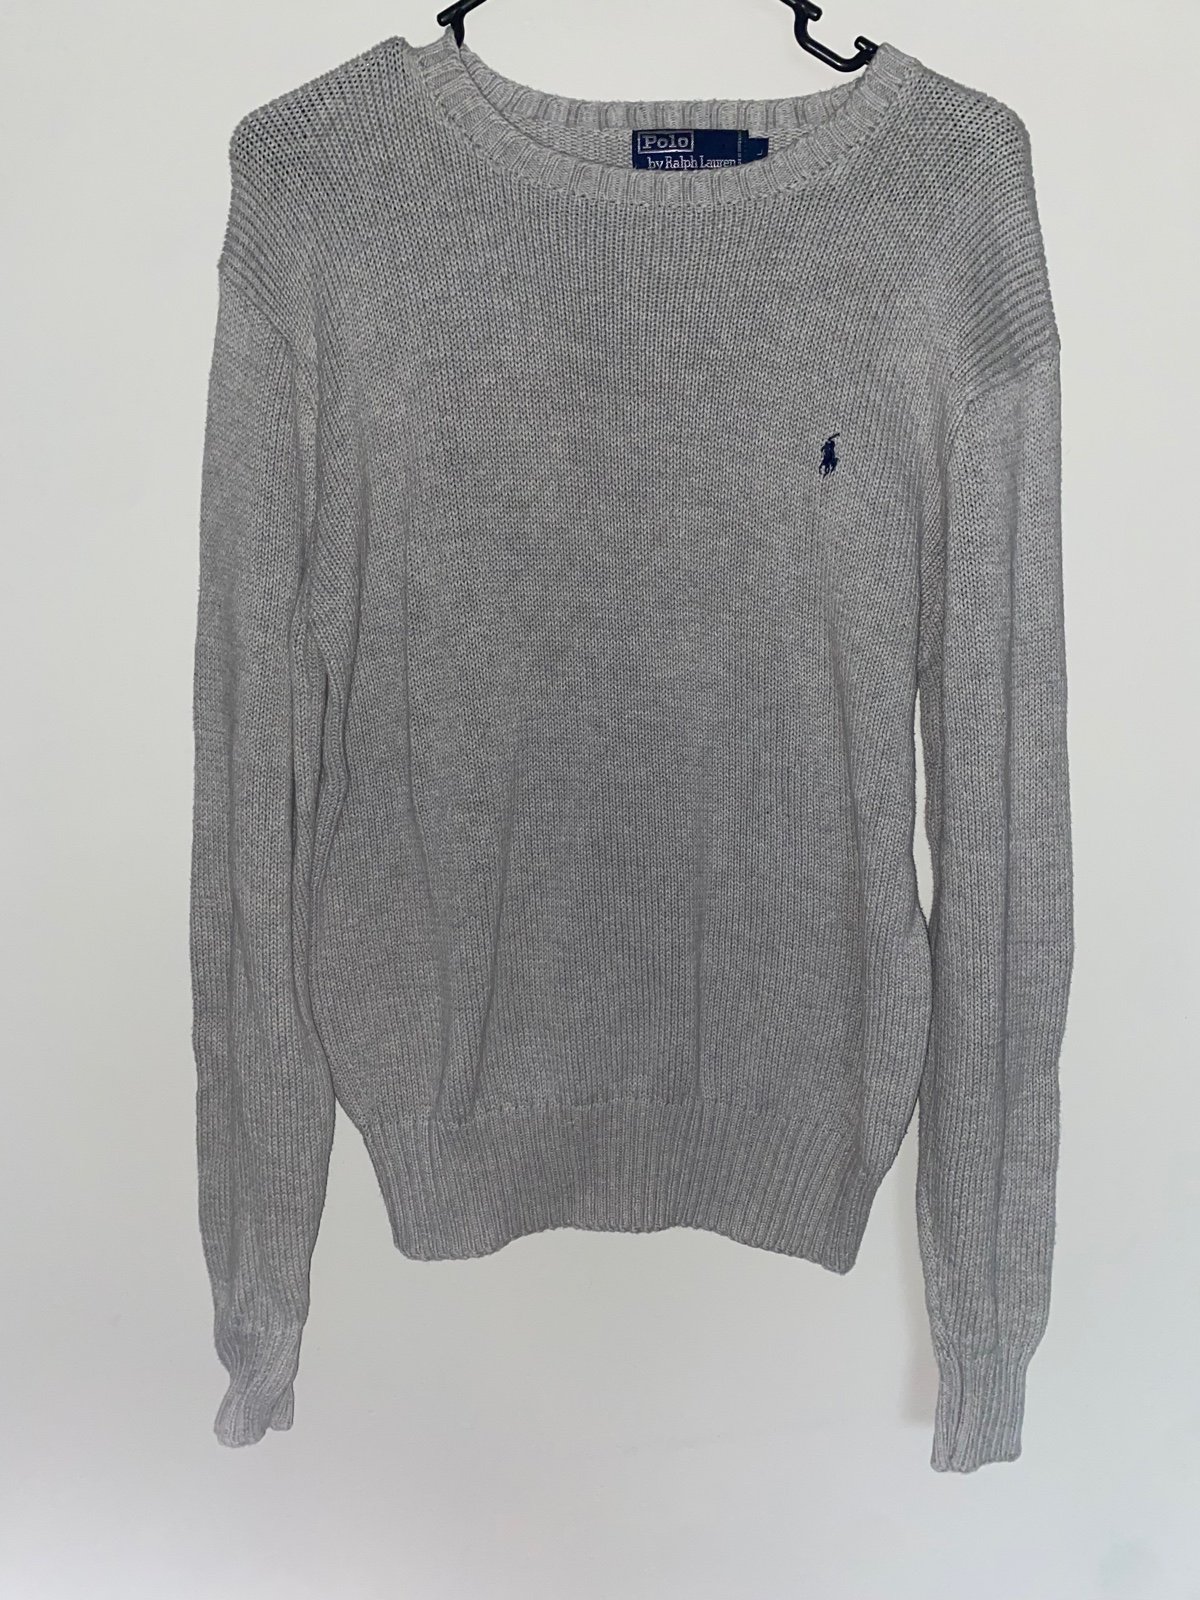 where to buy  Ralph Lauren POLO sweater size large lbaT